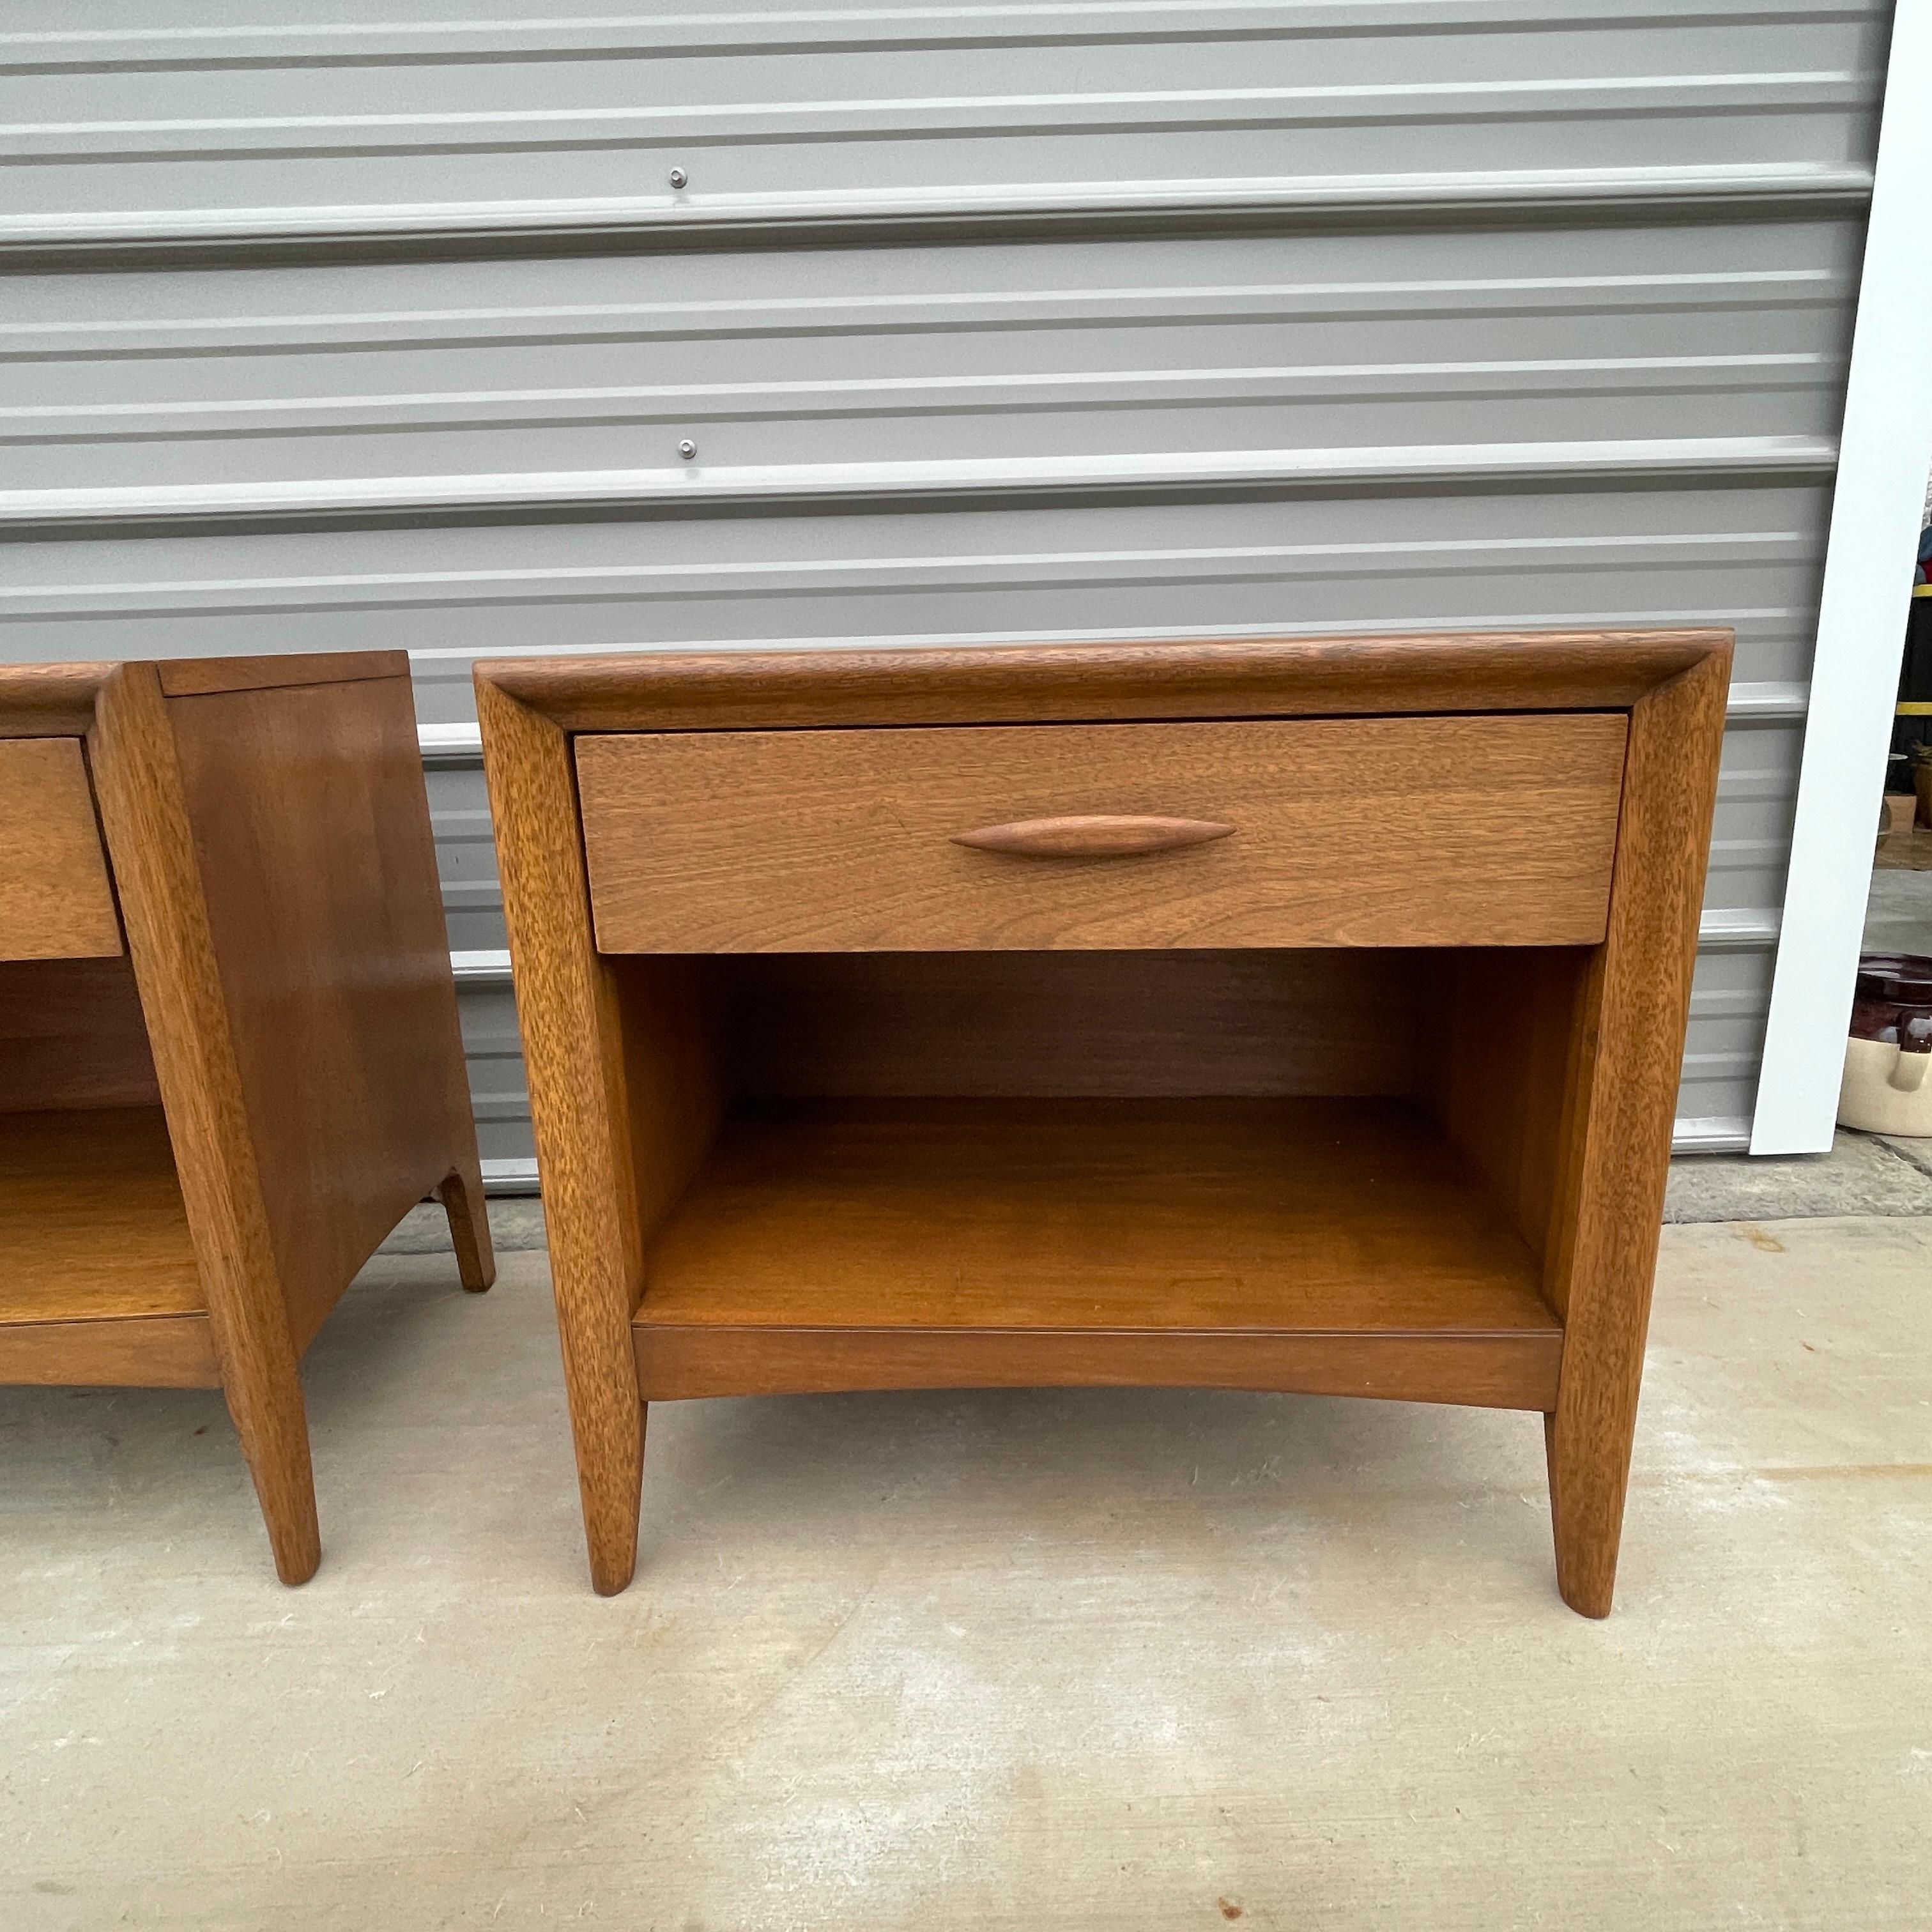 Turned Mid Century Modern Broyhill Emphasis Nightstands- a Pair